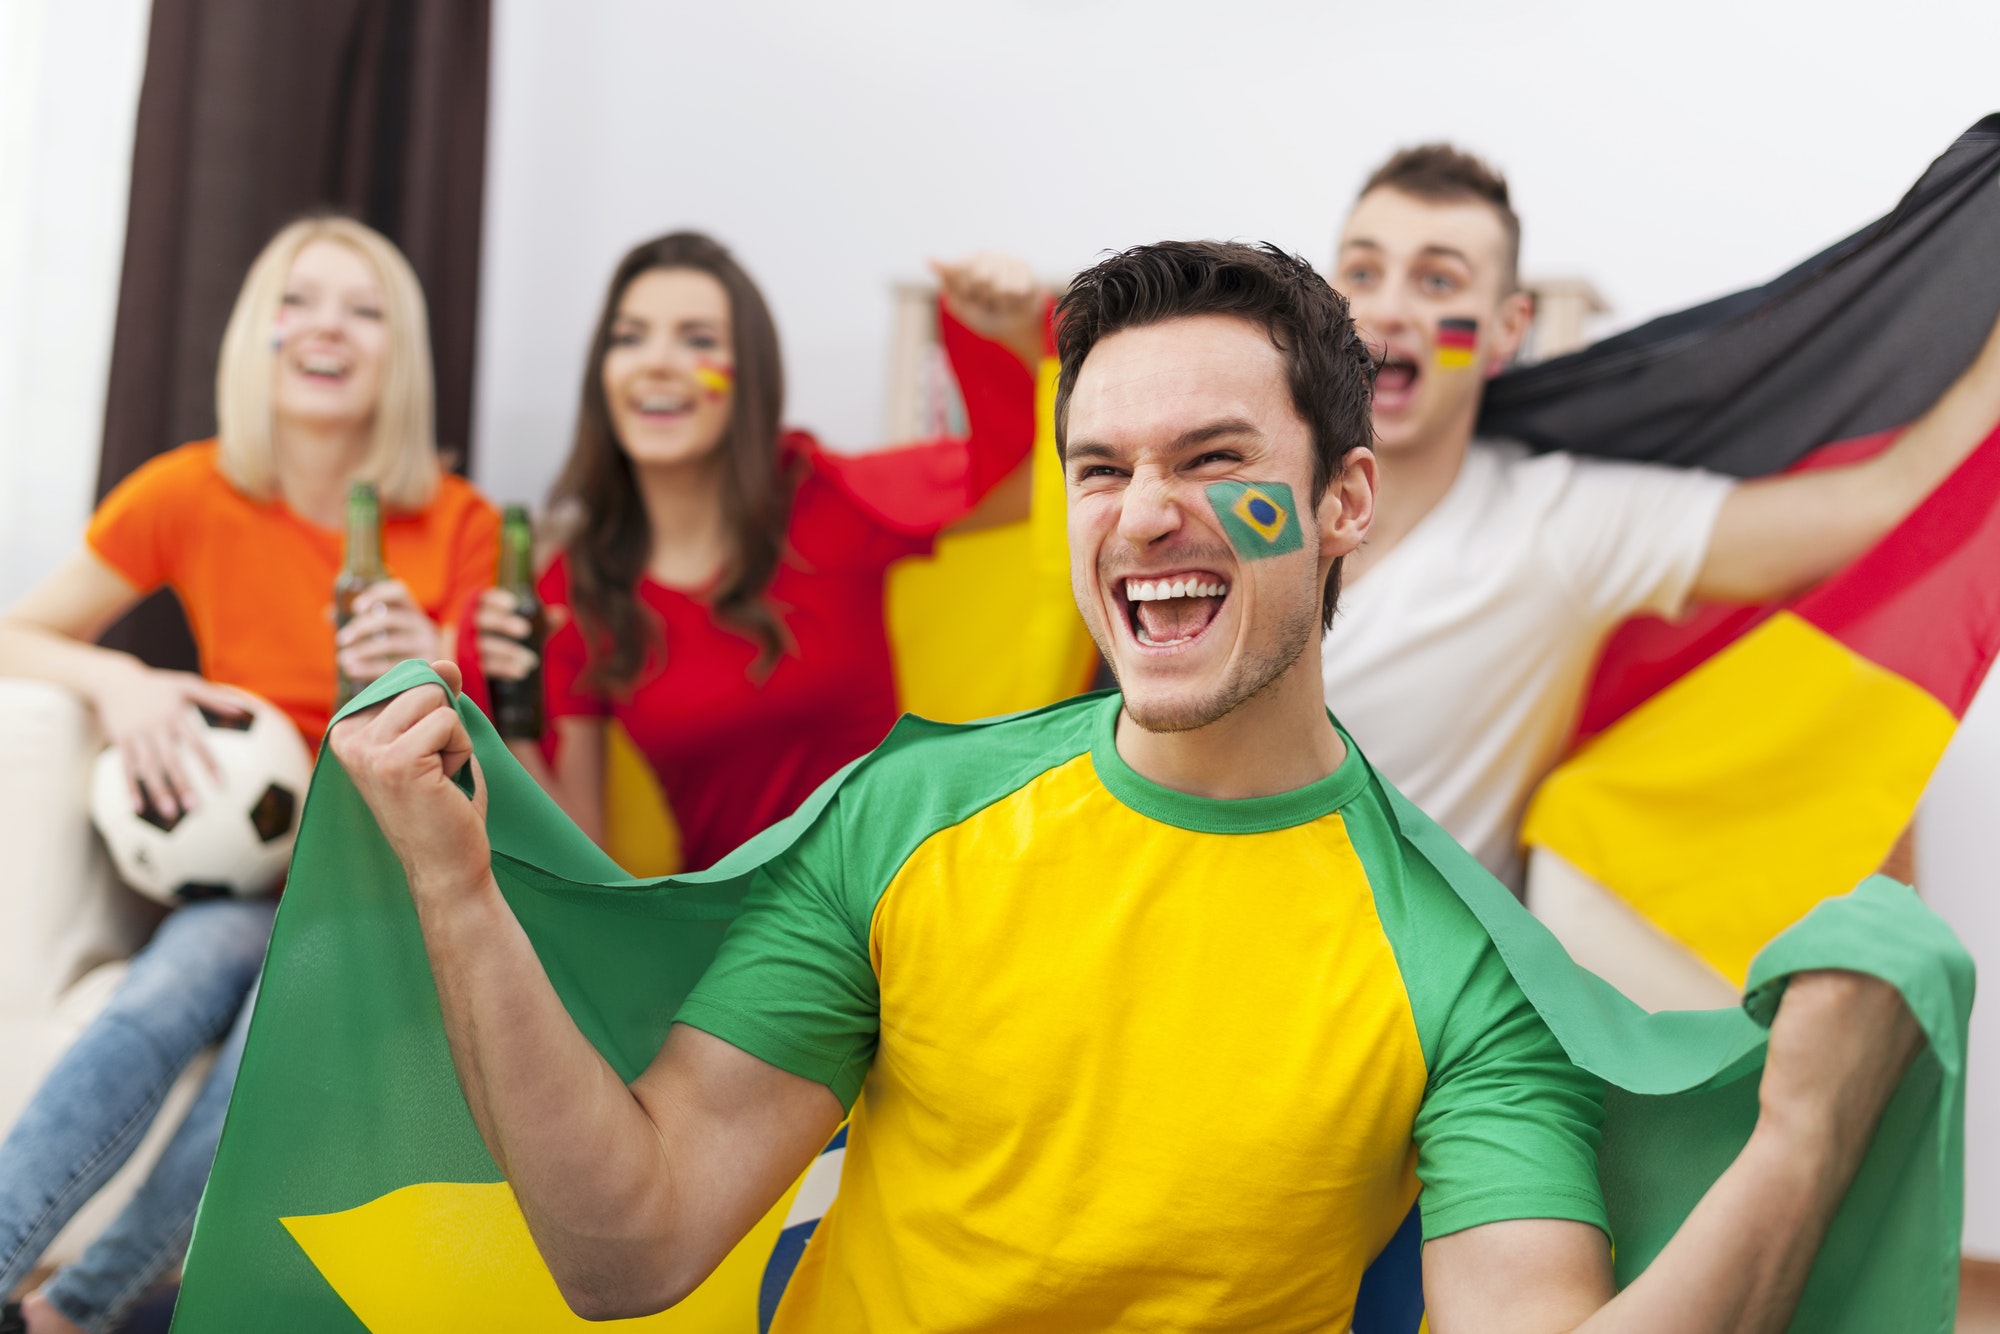 Excited brazilian man with her friends cheering football match